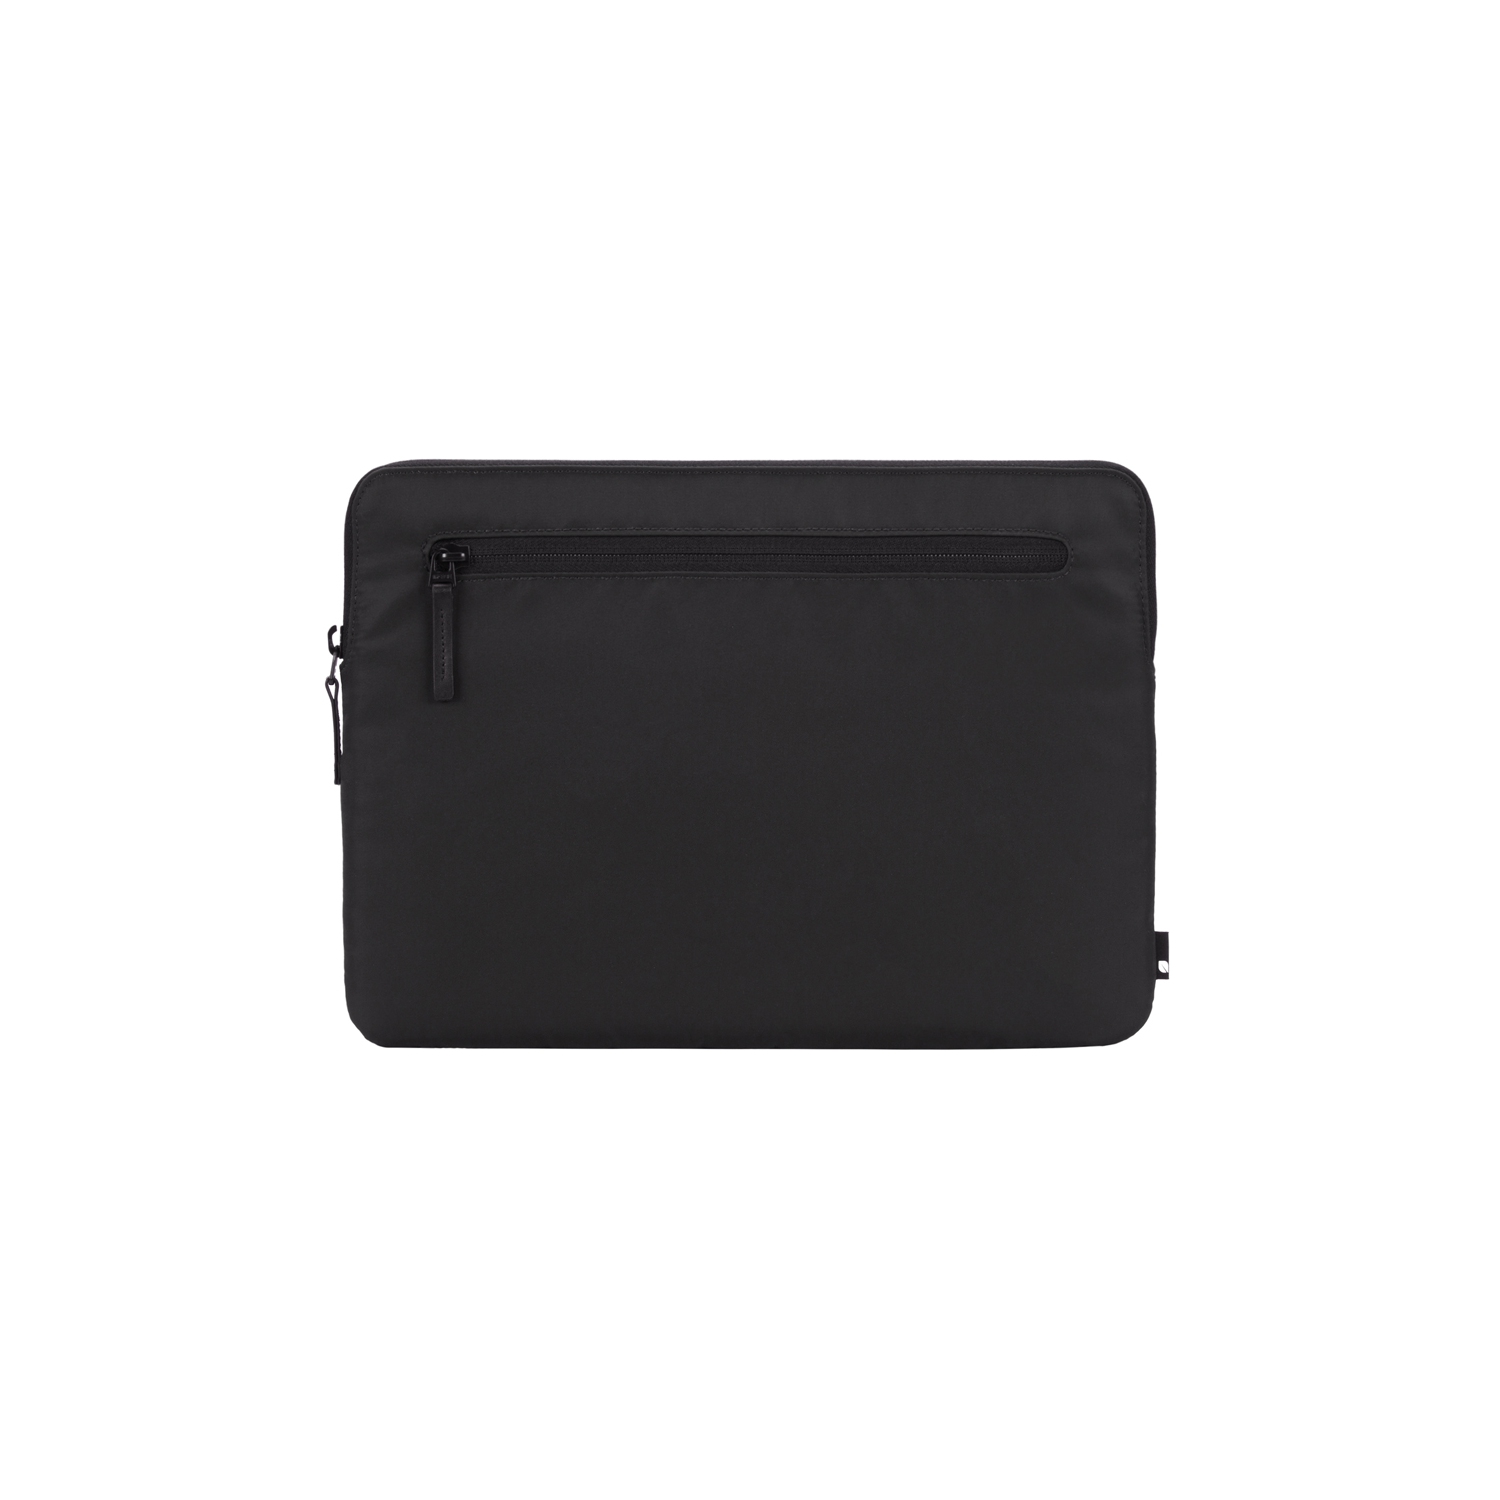 Incase Compact Sleeve in Flight Nylon Black for Macbook 15 inch Bags and Sleeves INMB100336BLK